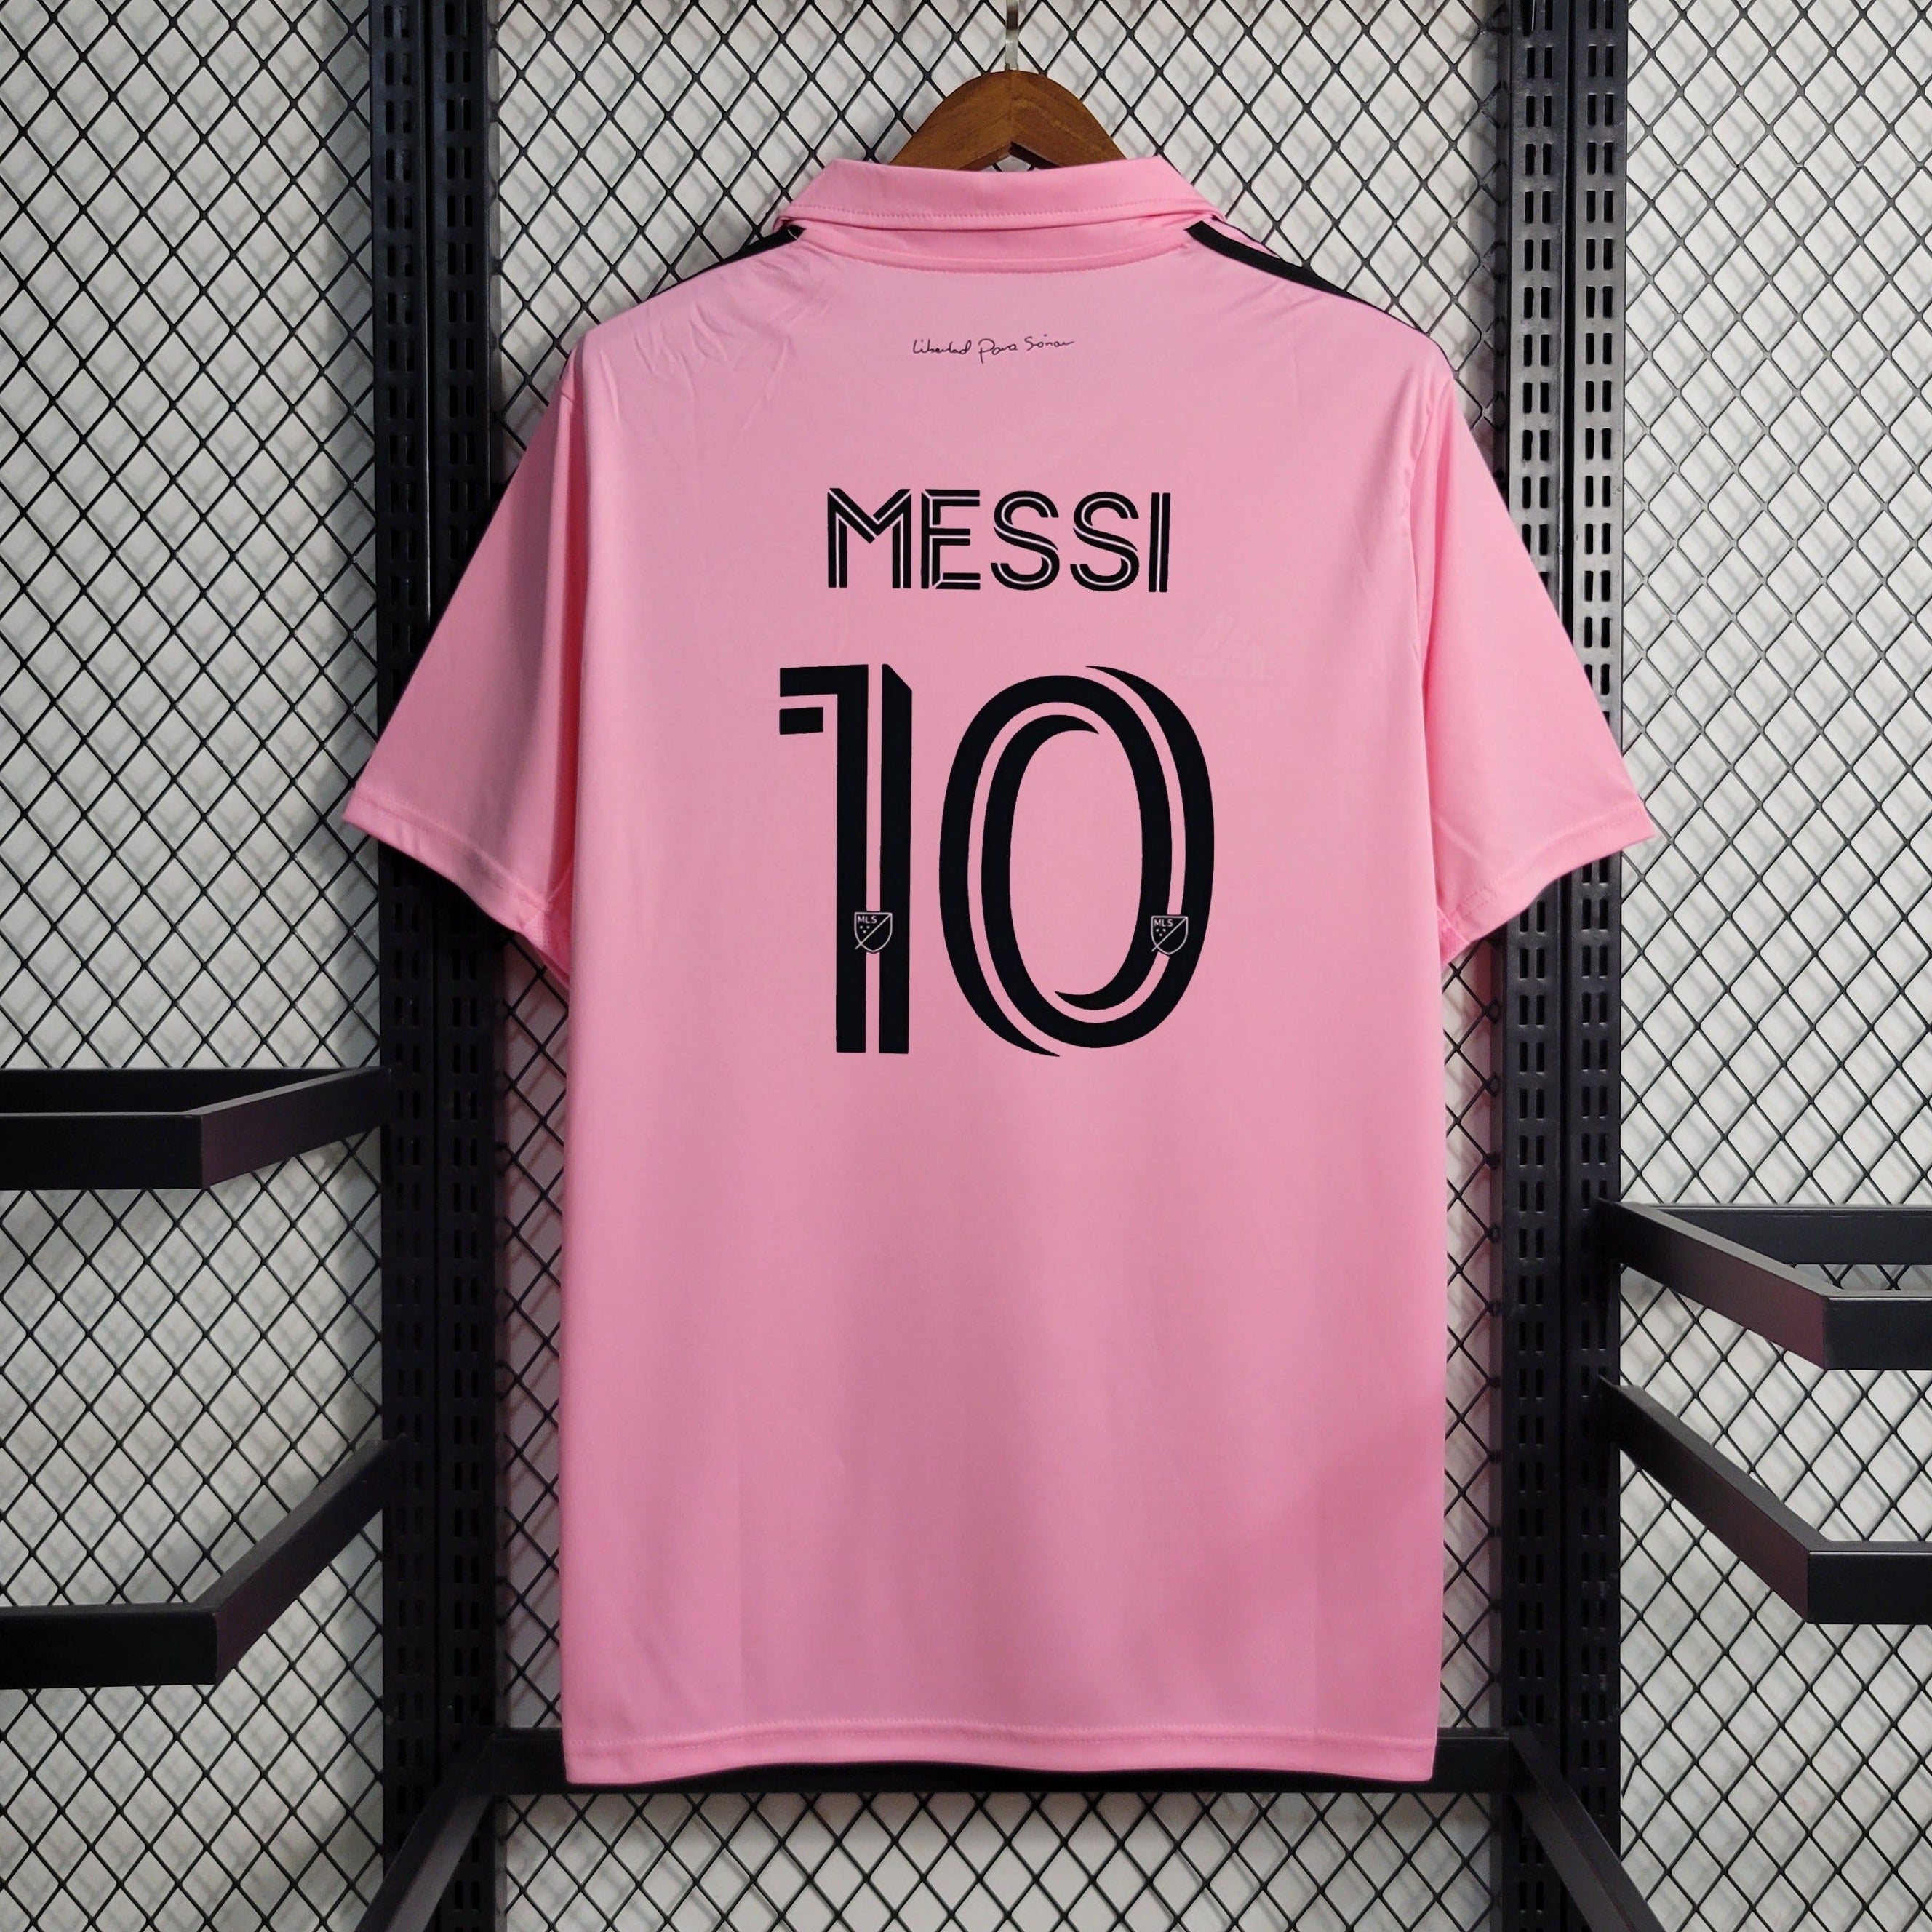 Inter Miami's pink jersey and what it represents for MLS club